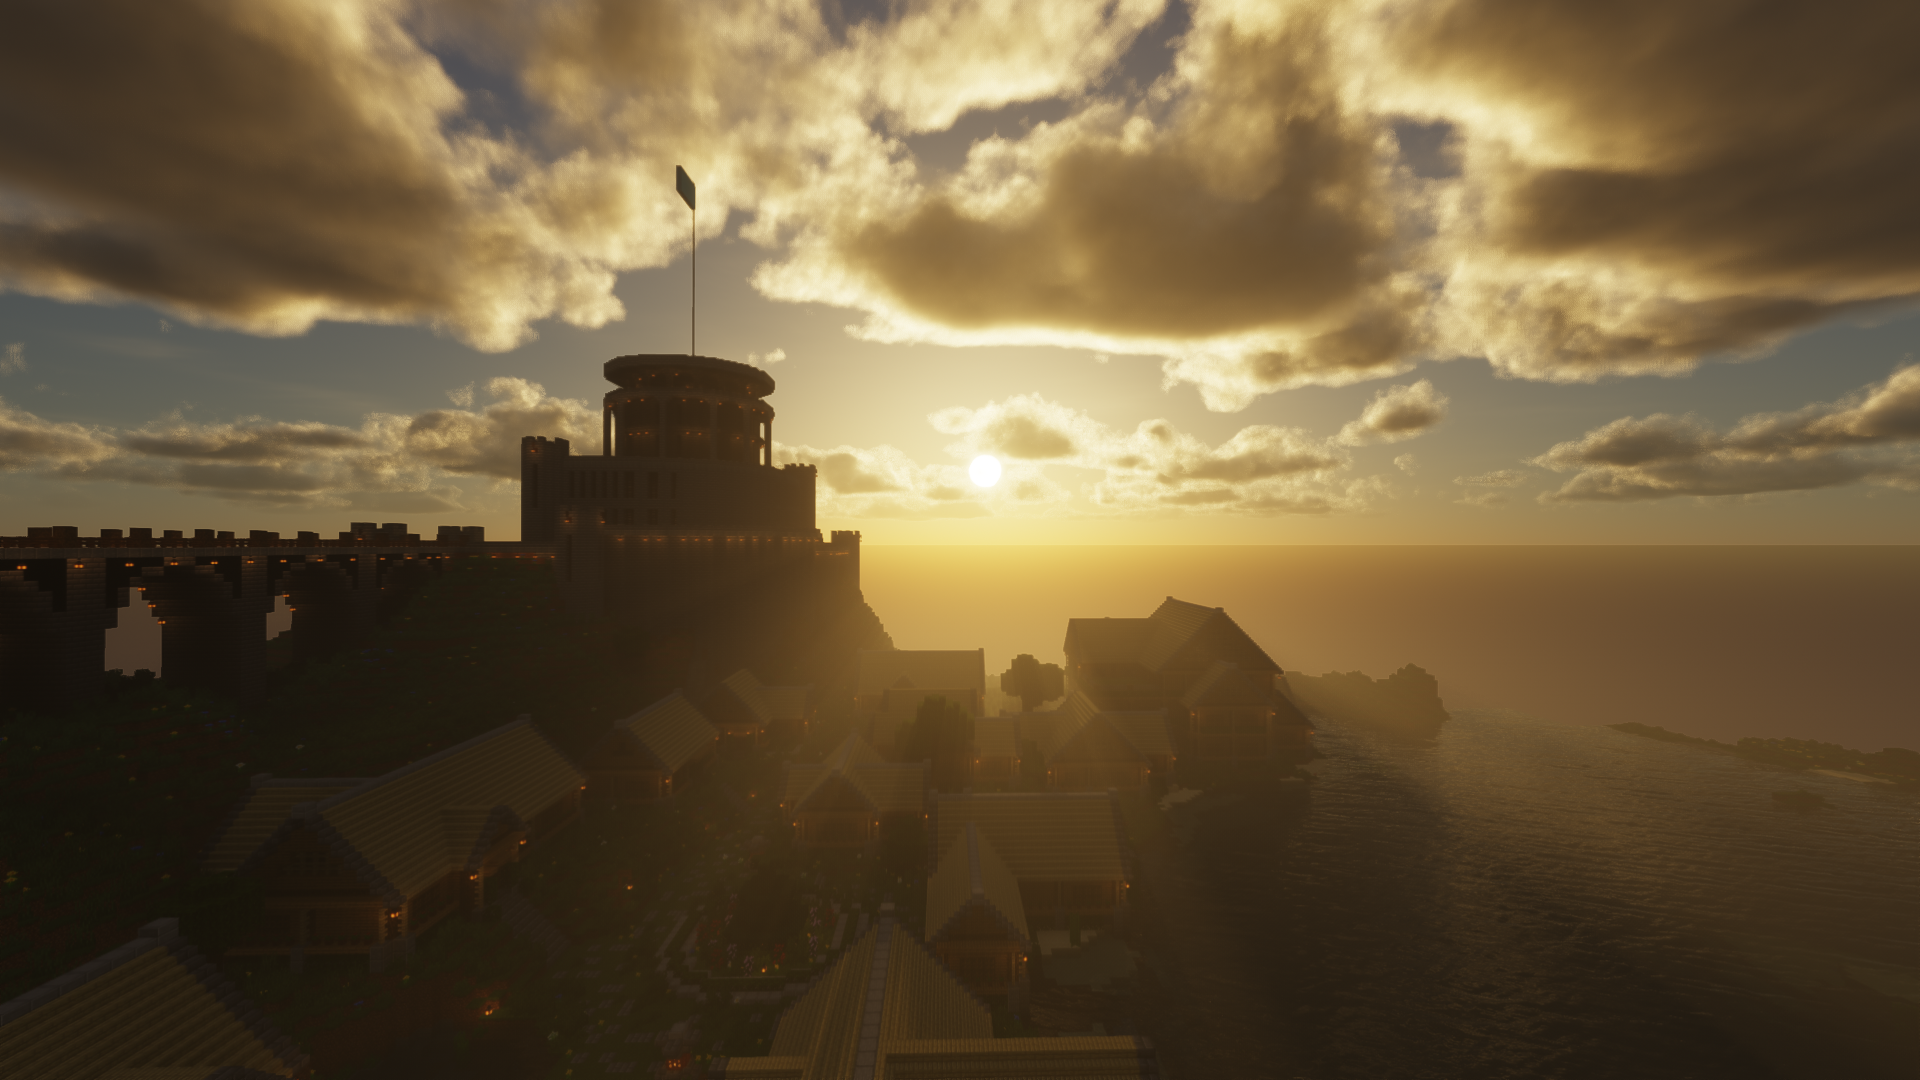 Minecraft Building Video Games Shaders Sun Rays CGi Sky Clouds Castle 1920x1080